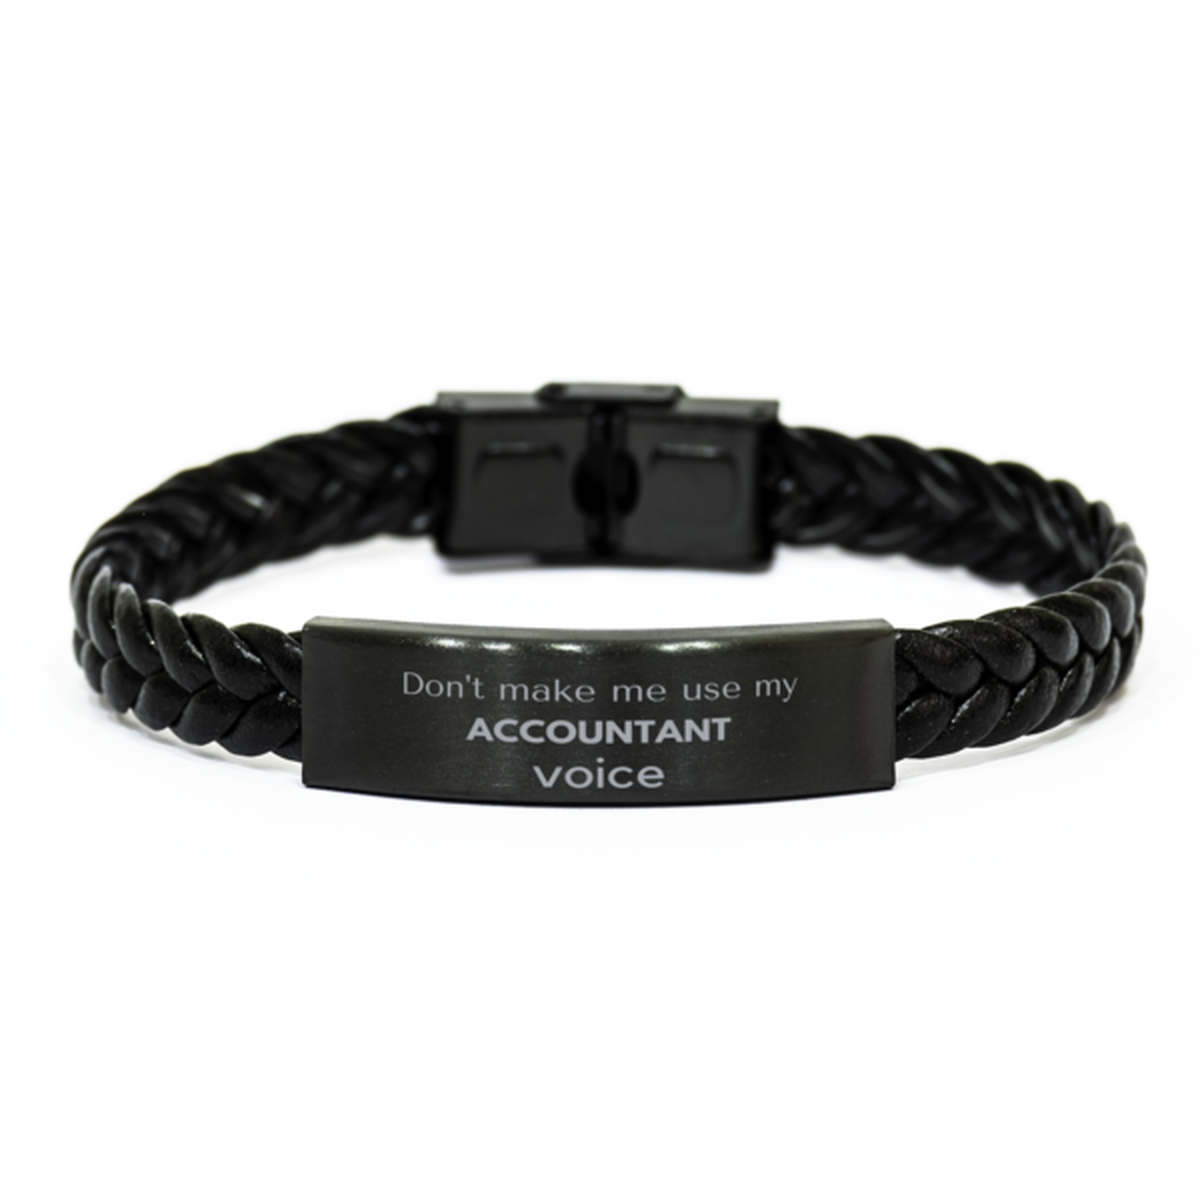 Don't make me use my Accountant voice, Sarcasm Accountant Gifts, Christmas Accountant Braided Leather Bracelet Birthday Unique Gifts For Accountant Coworkers, Men, Women, Colleague, Friends